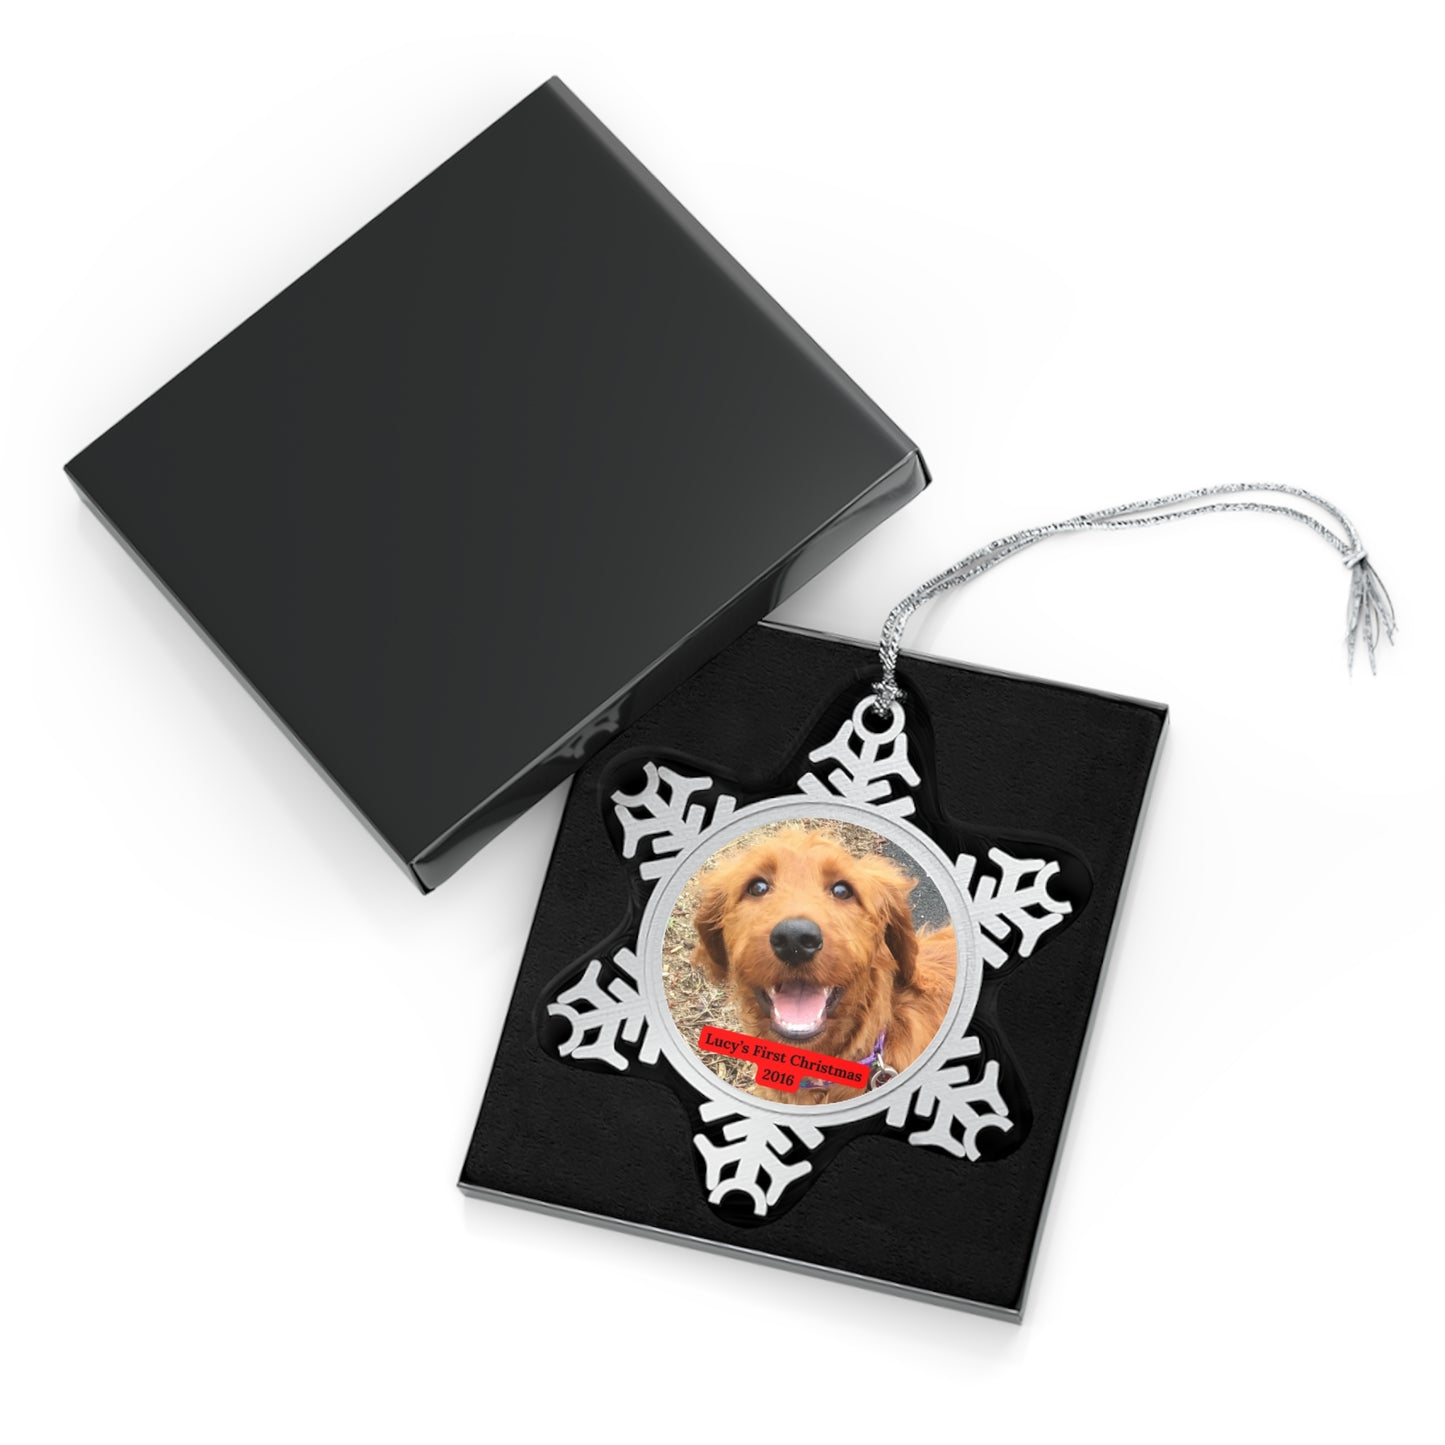 Pet Picture Frame First Christmas Ornament - Pewter Snowflake - Pet's First Christmas Ornament, Customized Pet Ornament With Name & Year